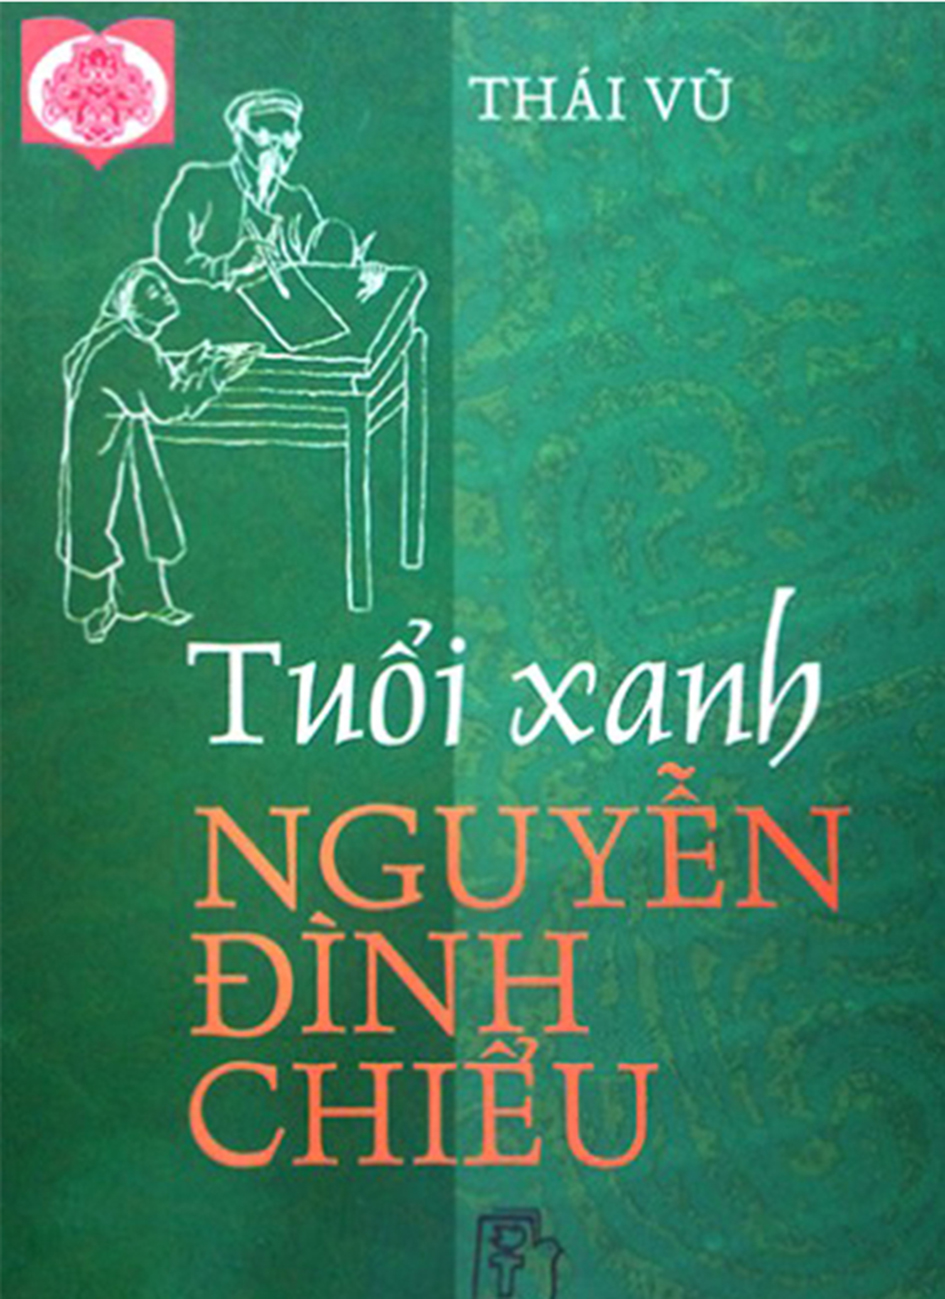 tuoi xanh nguyen dinh chieu